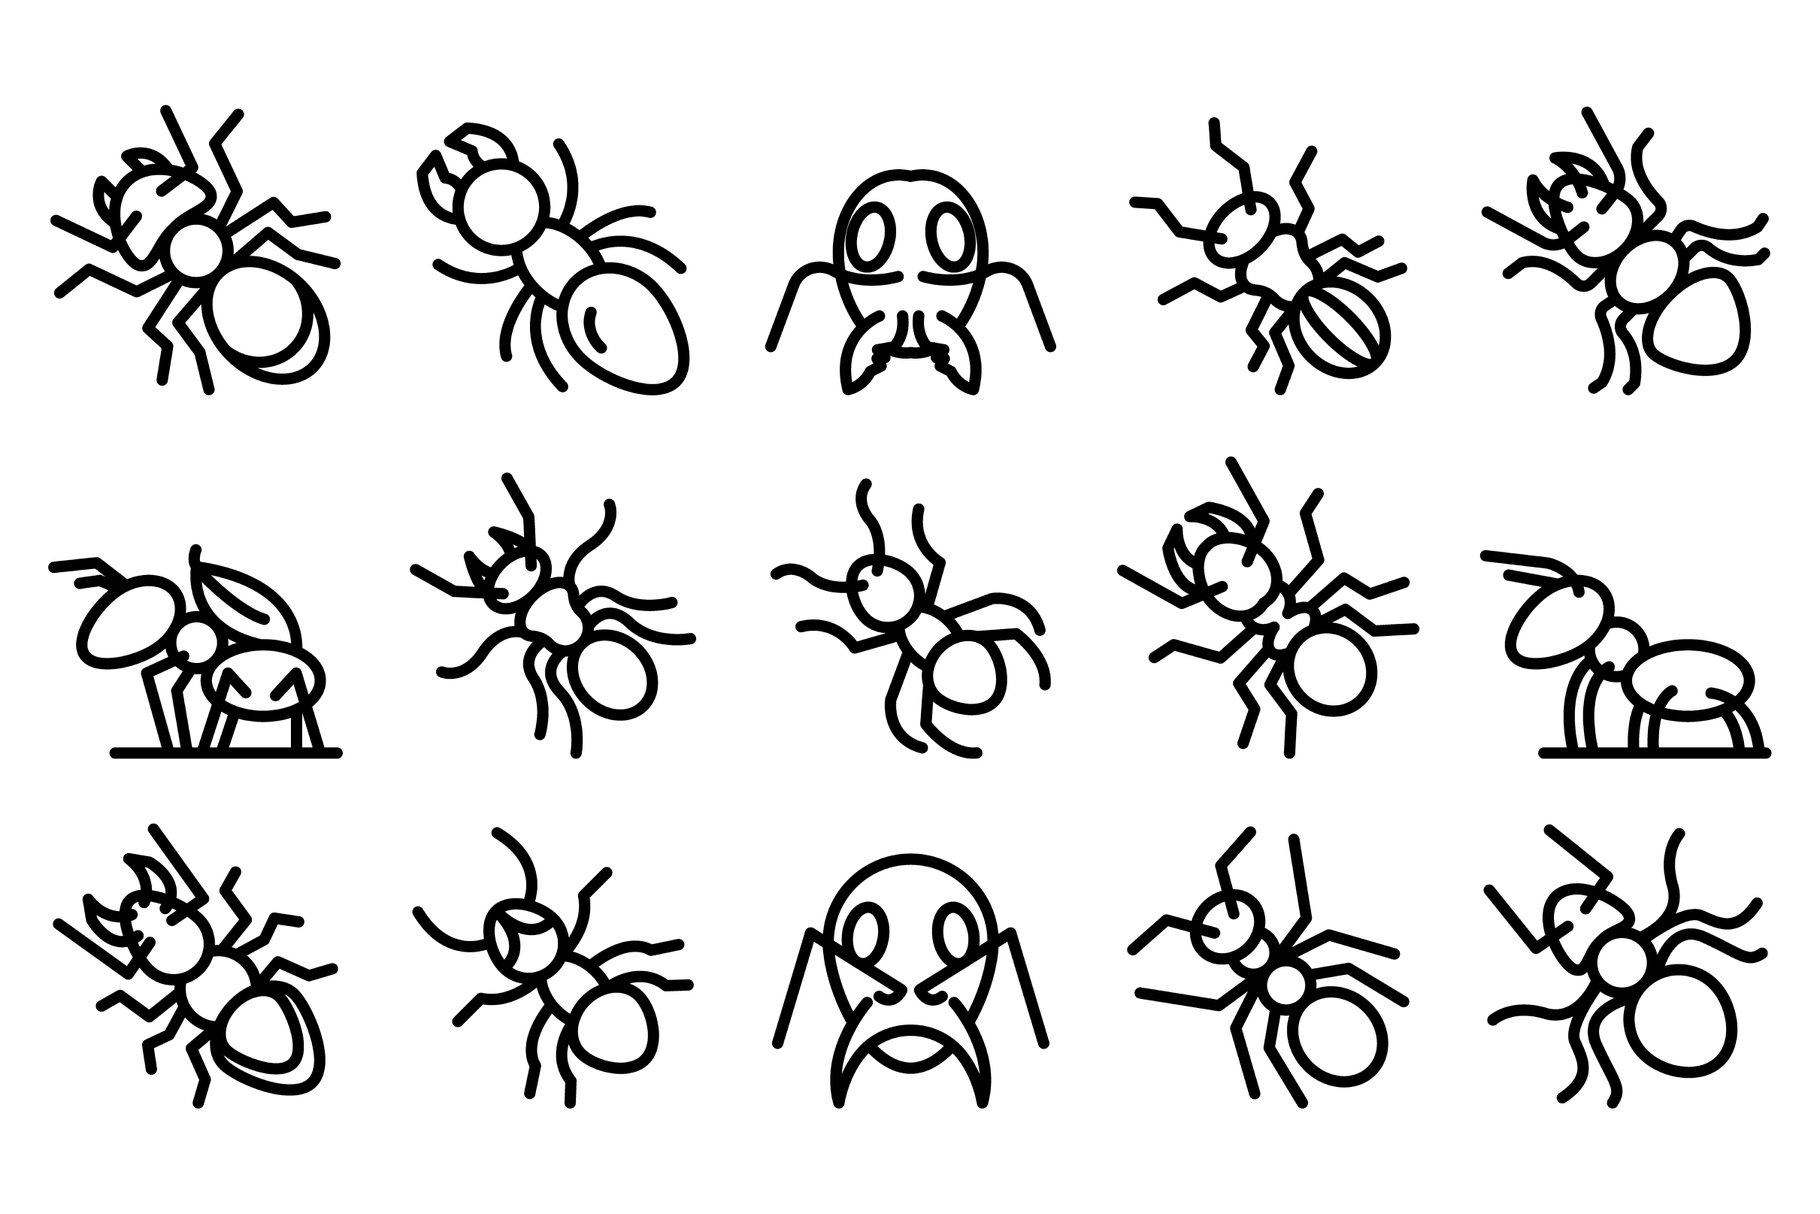 Ant icons set, outline style cover image.